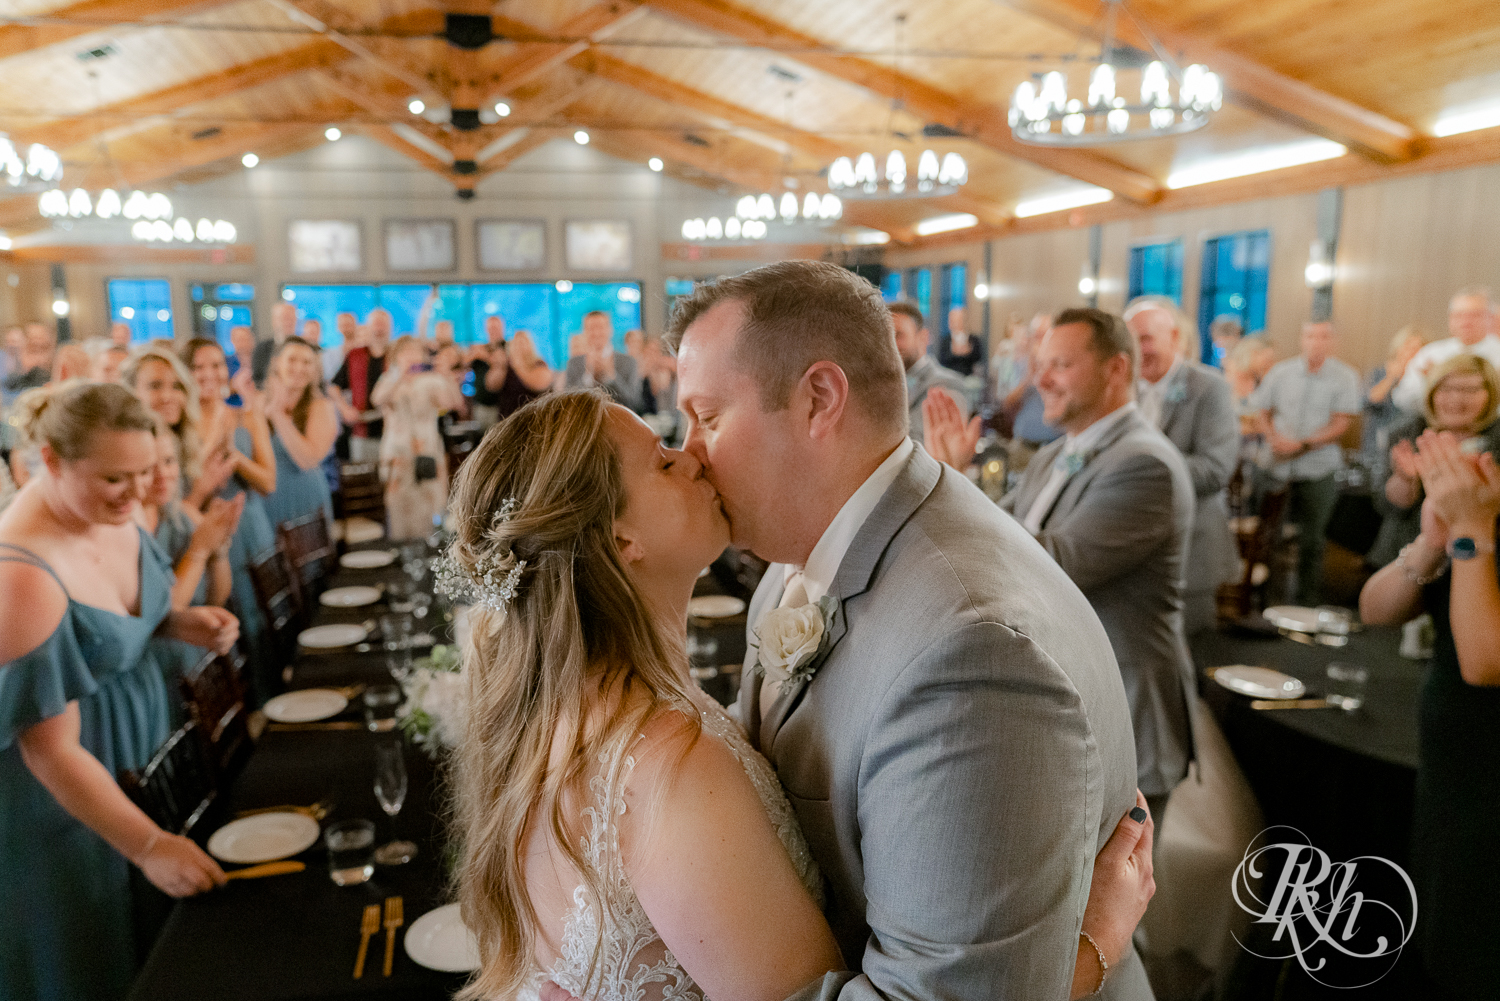 Bride and groom kiss at head table during wedding reception at 7 Vines Vineyard in Dellwood, Minnesota.